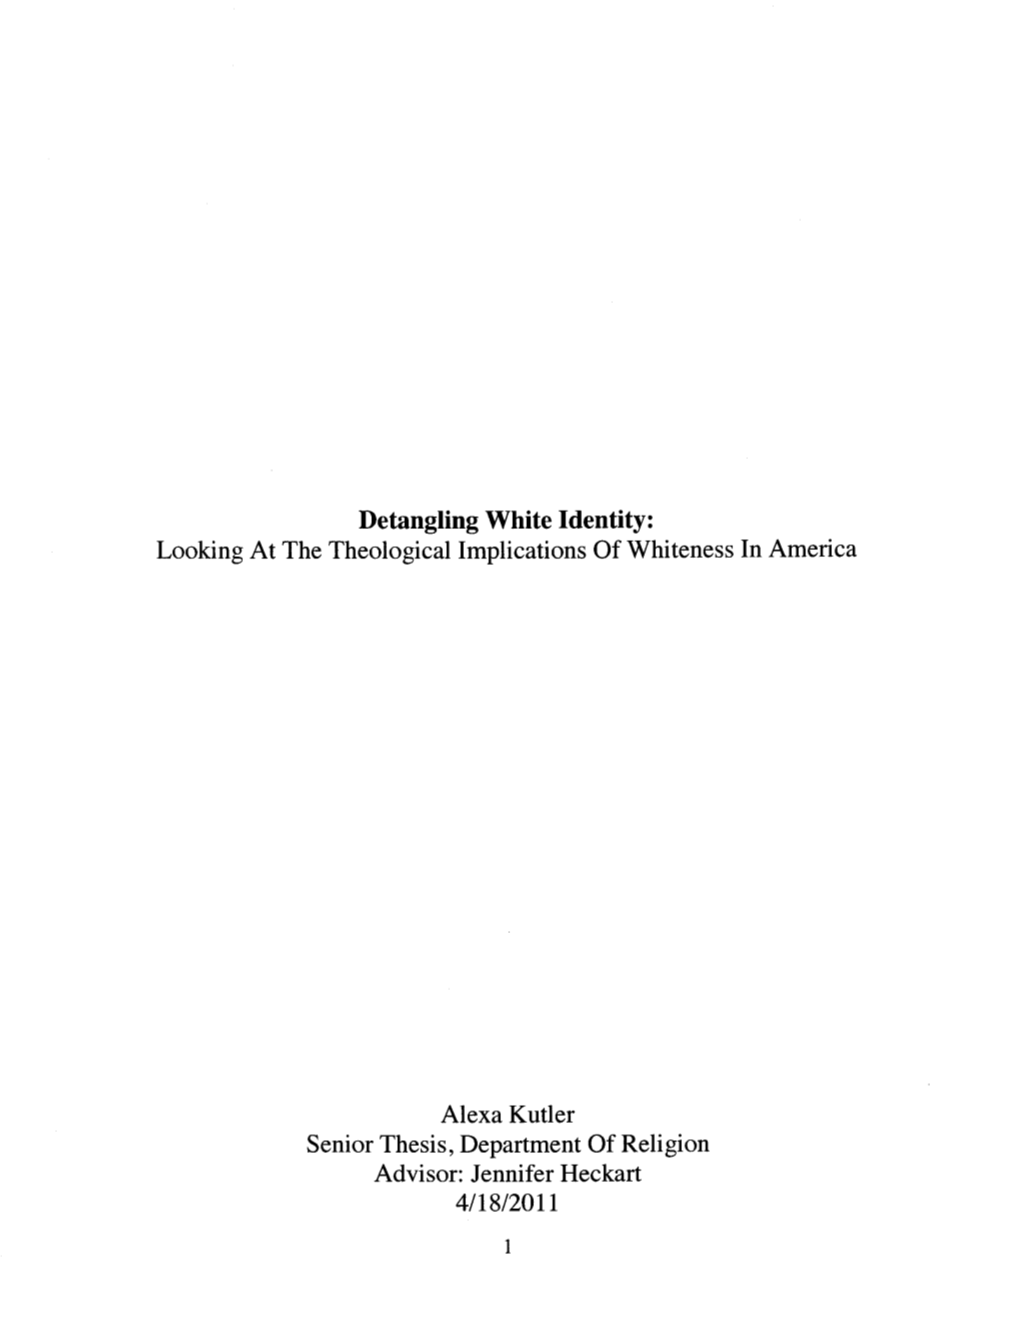 Detangling White Identity: Looking at the Theological Implications of Whiteness in America